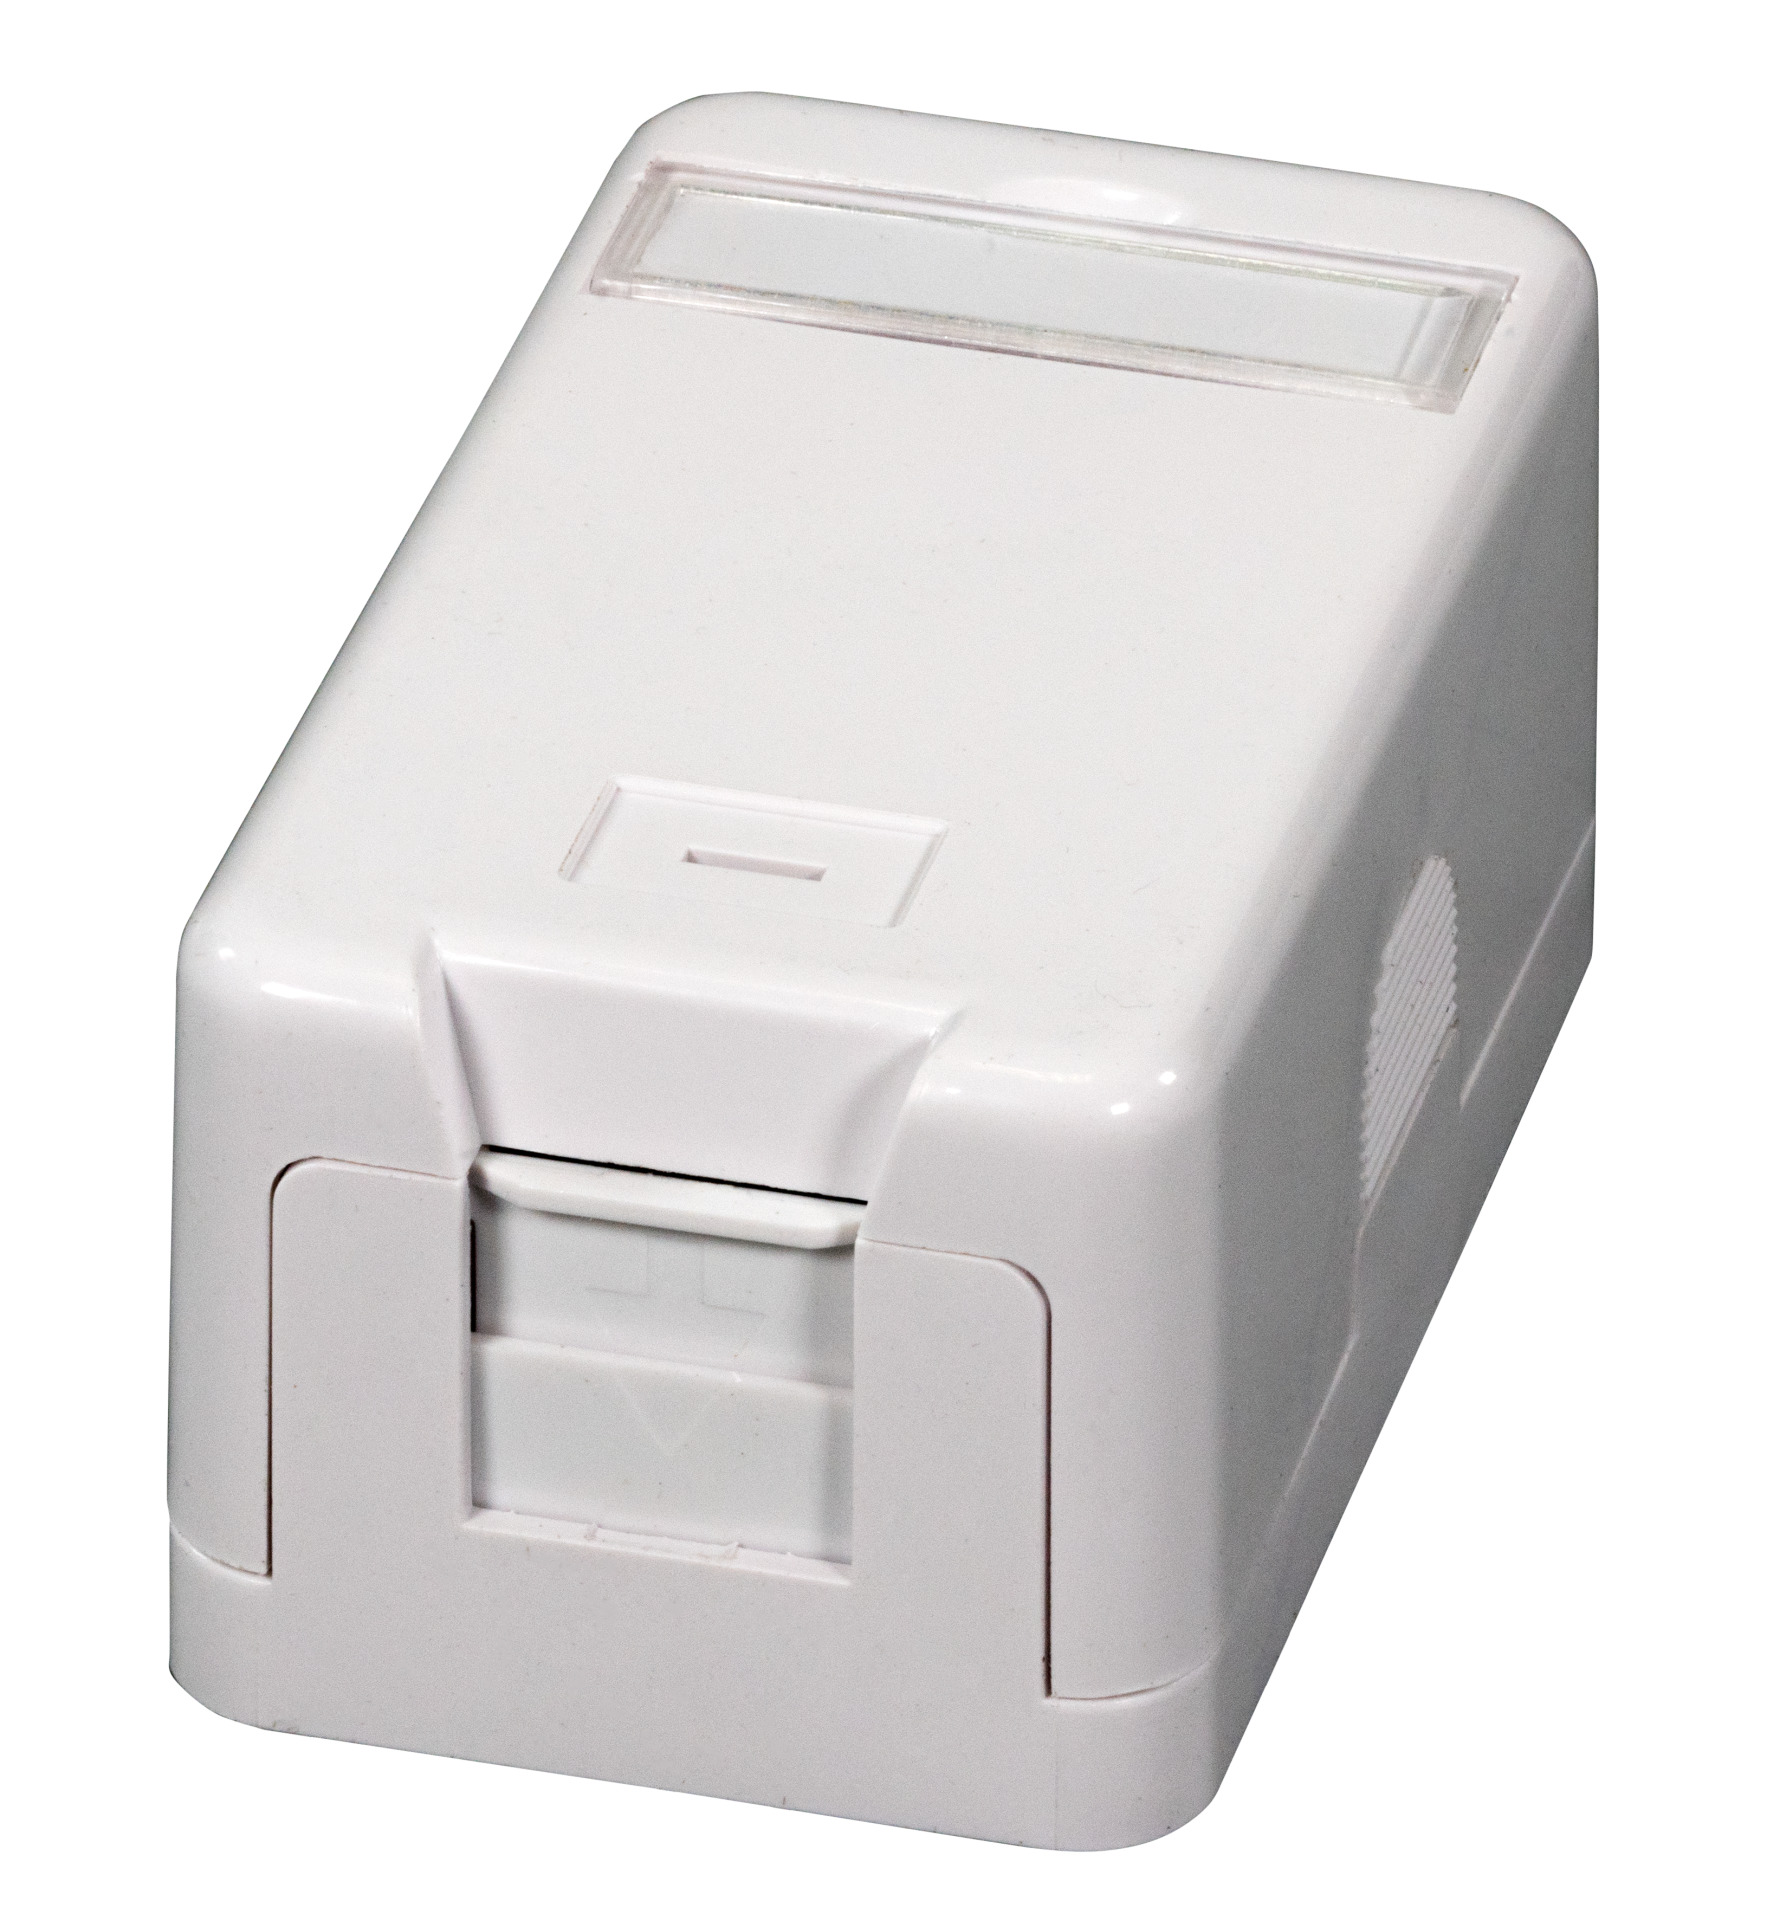 Keystone Distribution box surface mounting, 2-Port, dust protection self-closing